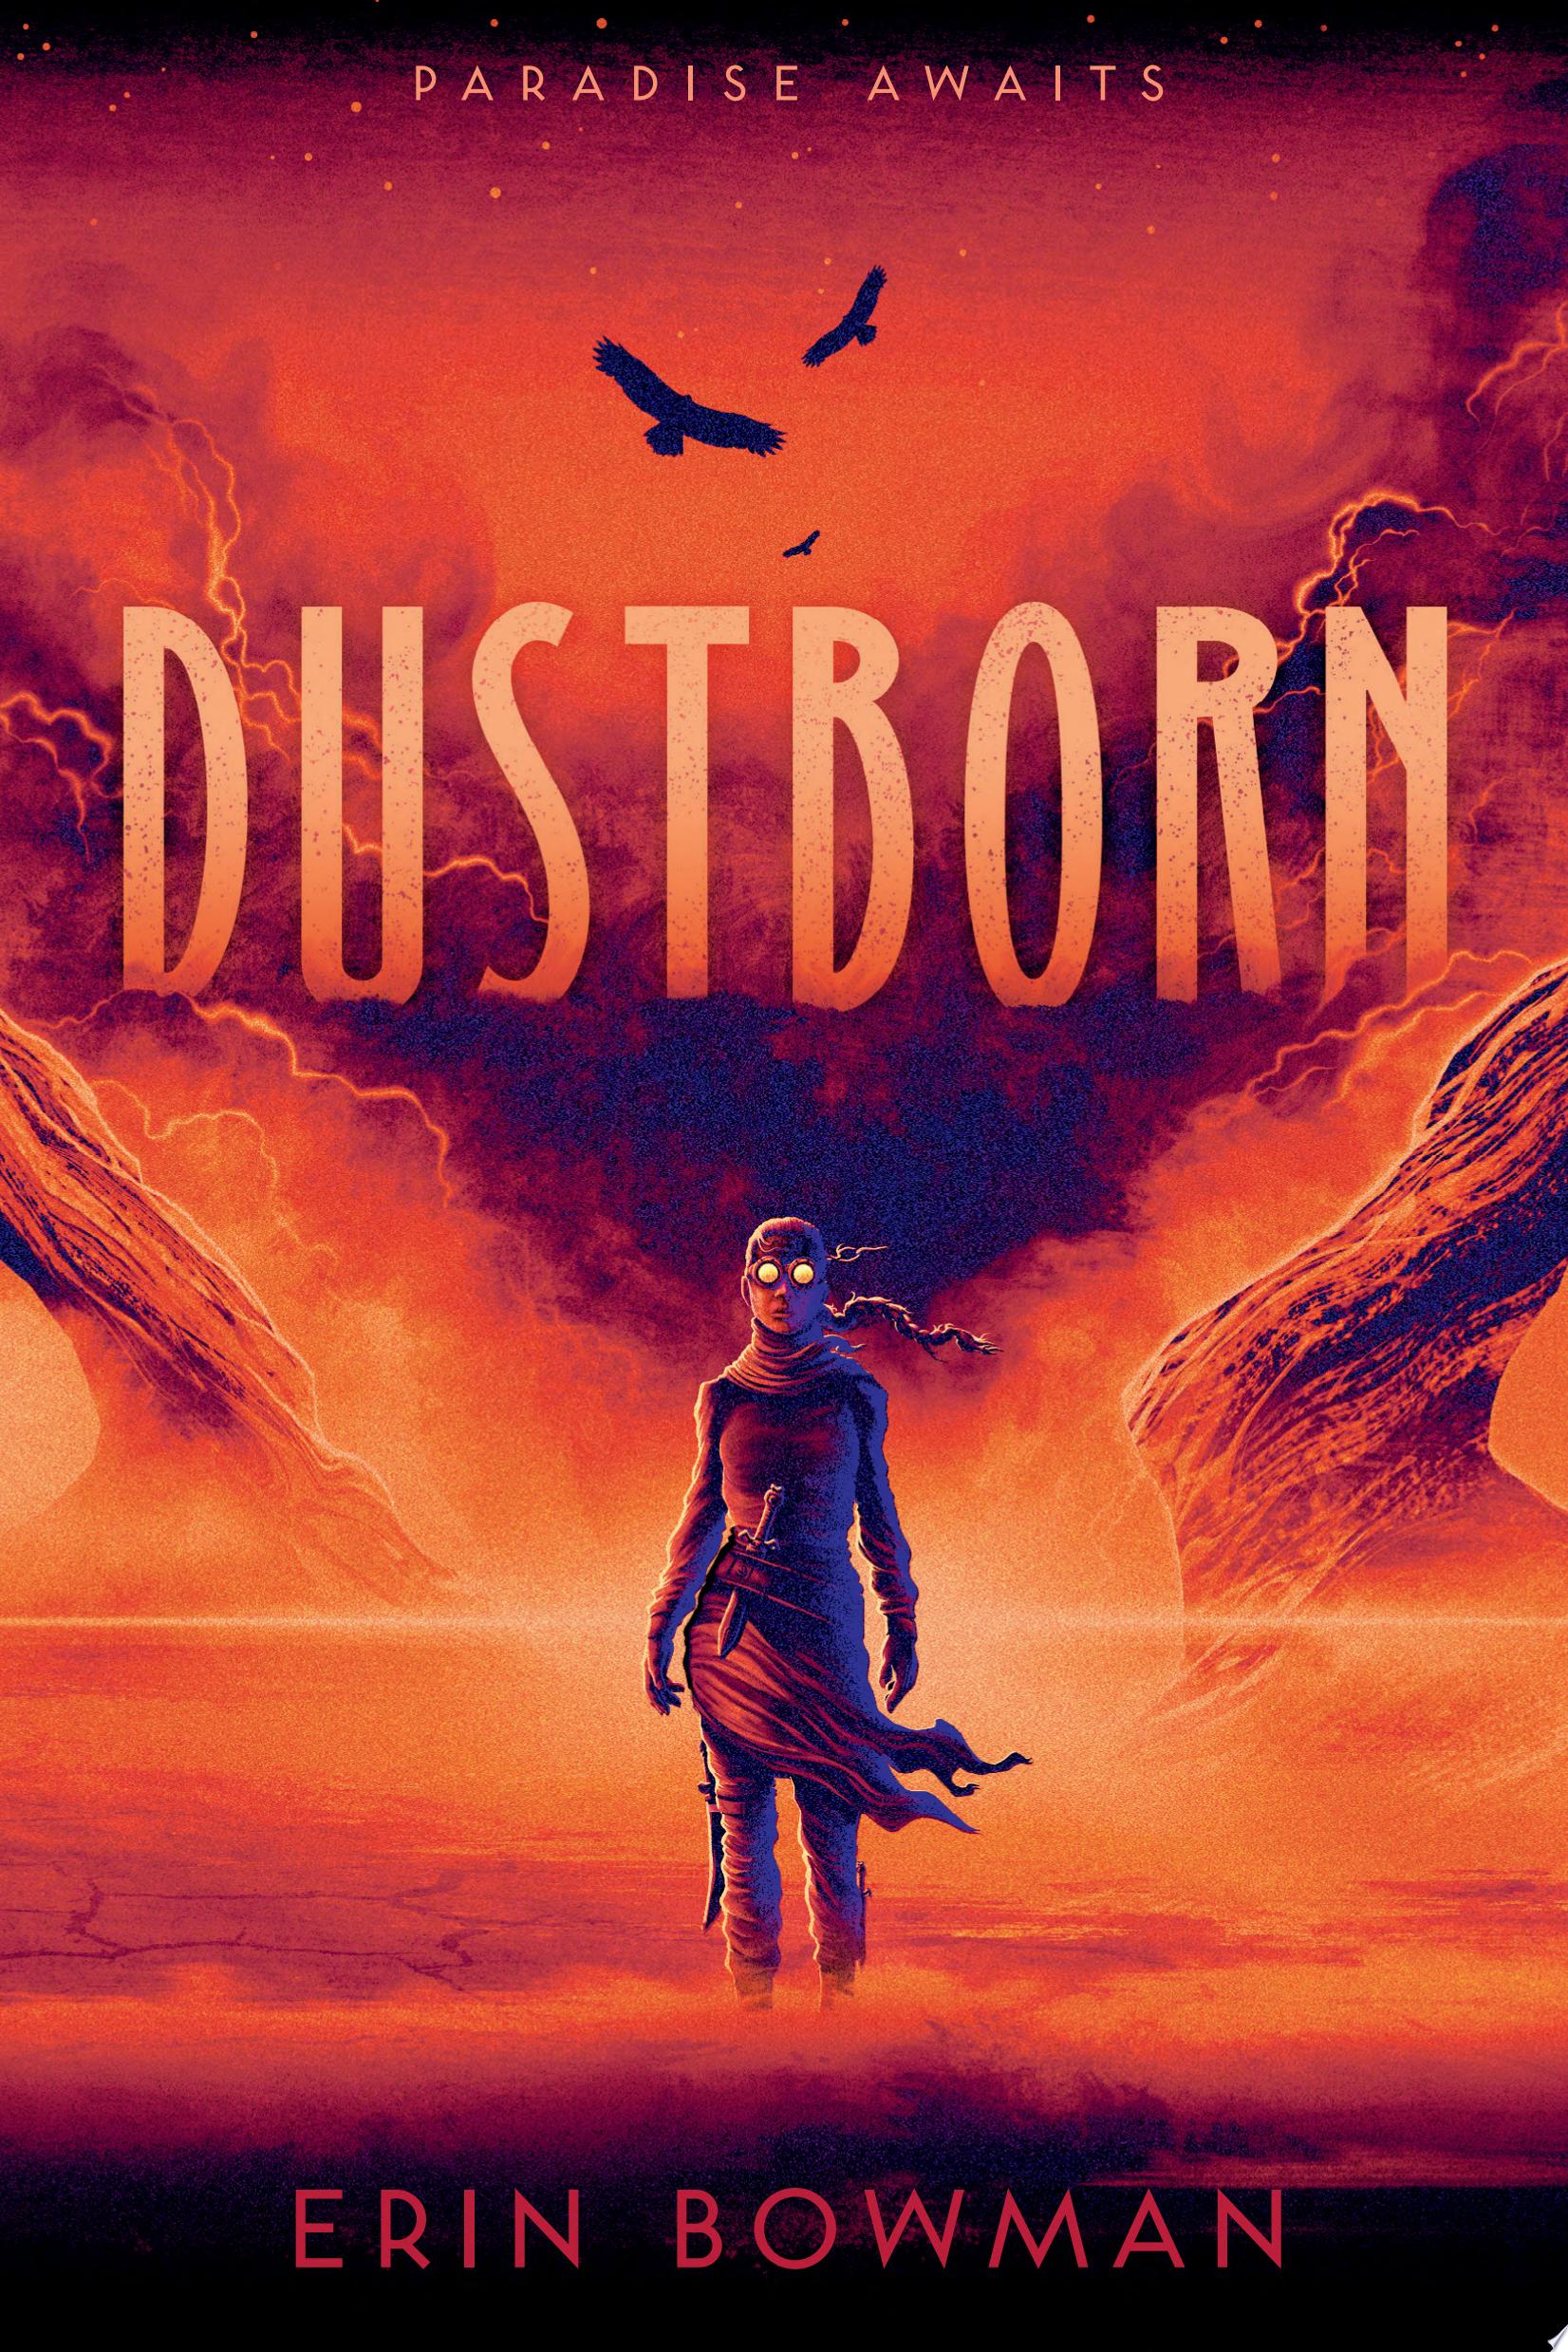 Image for "Dustborn"